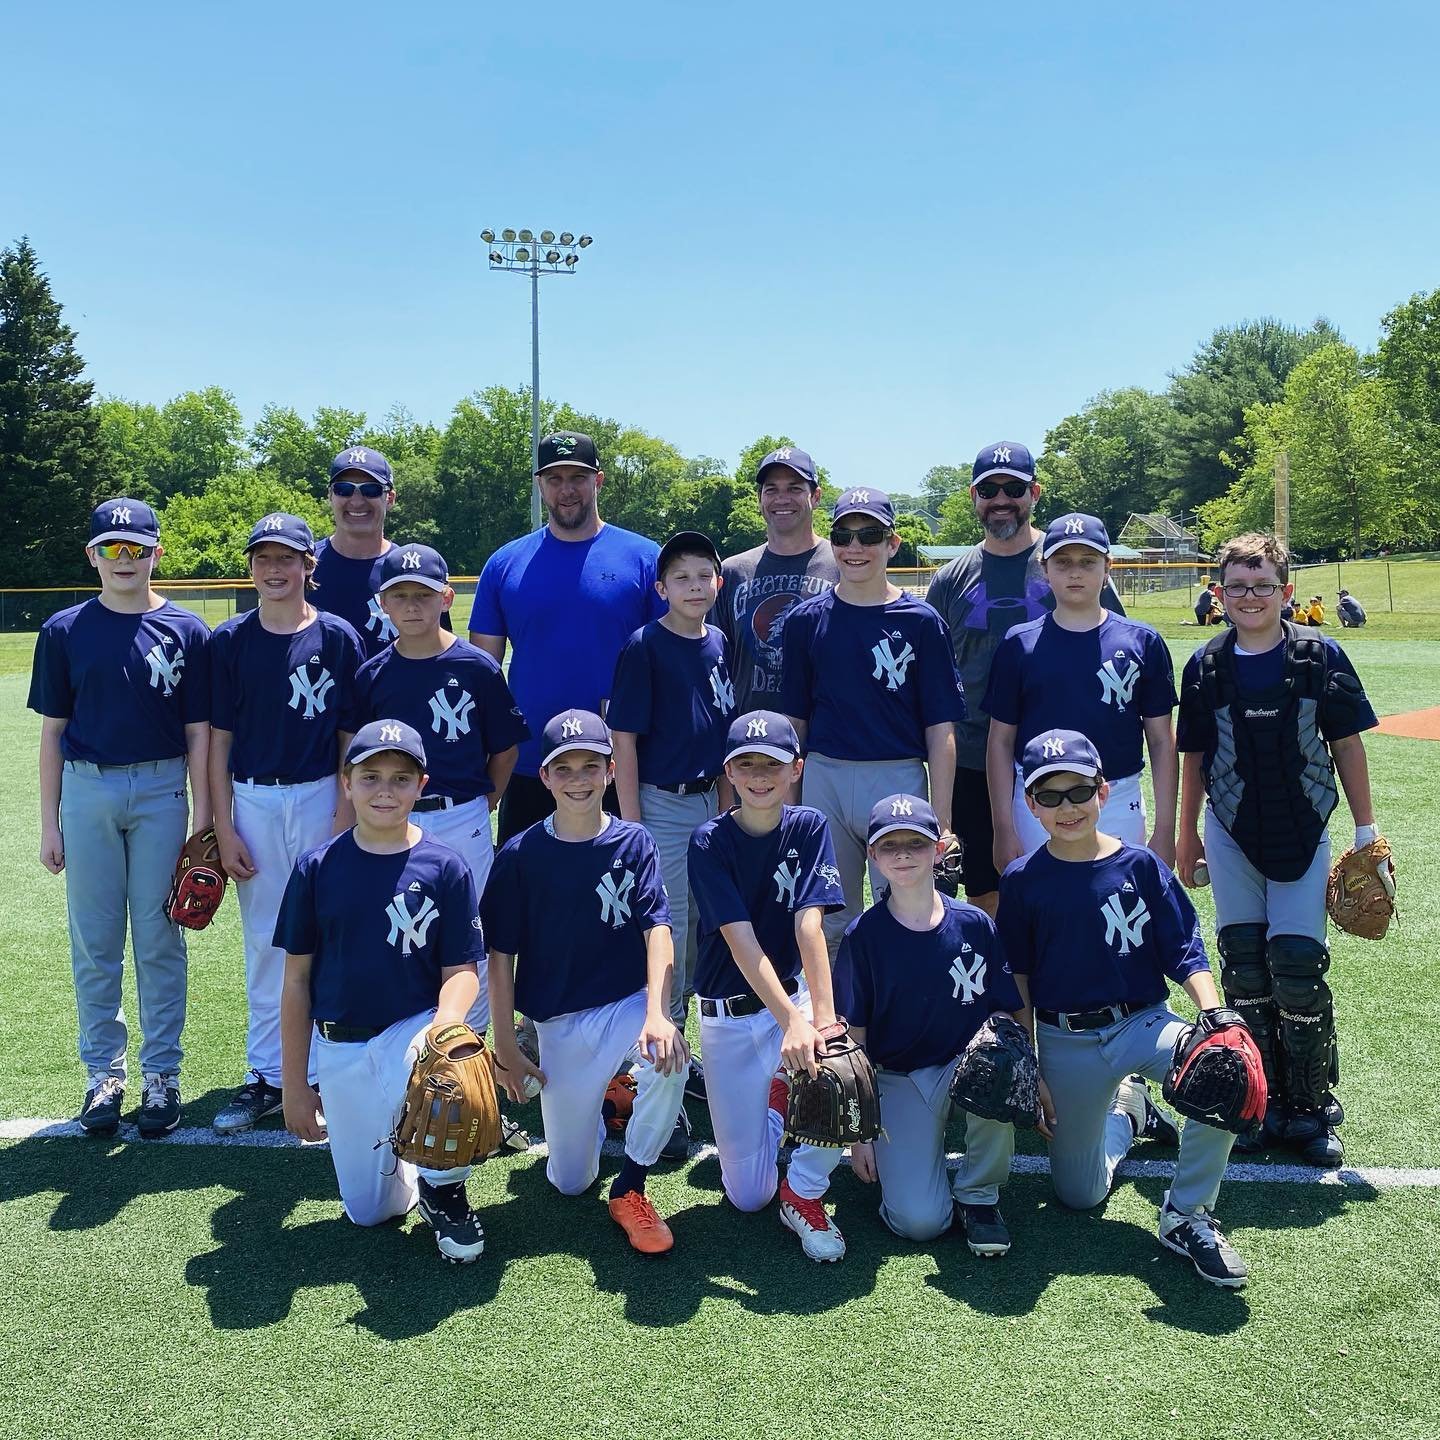 The Severna Park Yankees went 14-3 this season, making it to the Anne Arundel County Majors championship game.